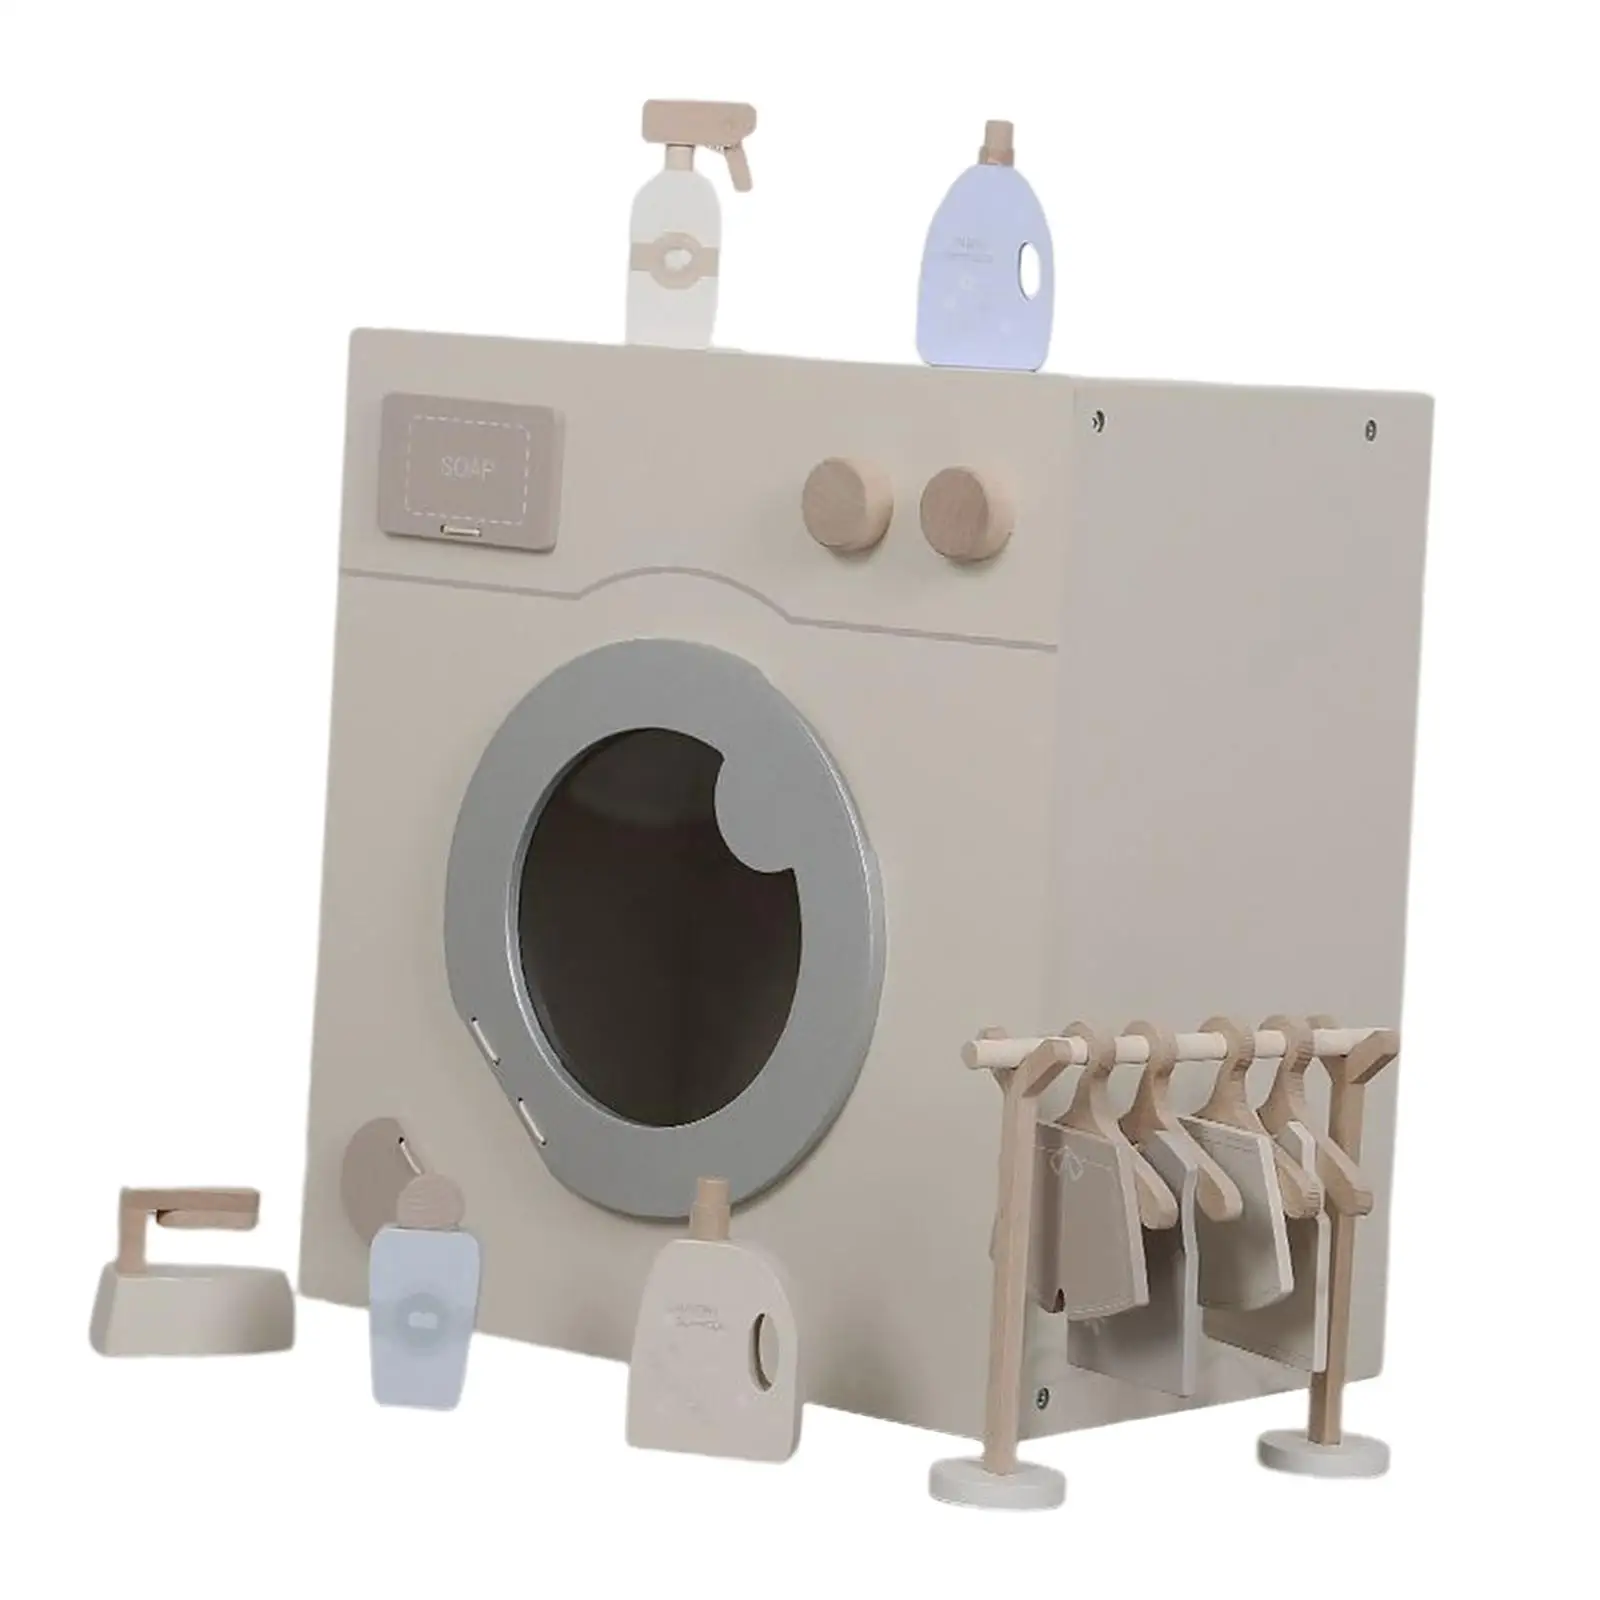 Washing Machine Playset Realistic Laundry Set with Accessories for Kids Gift